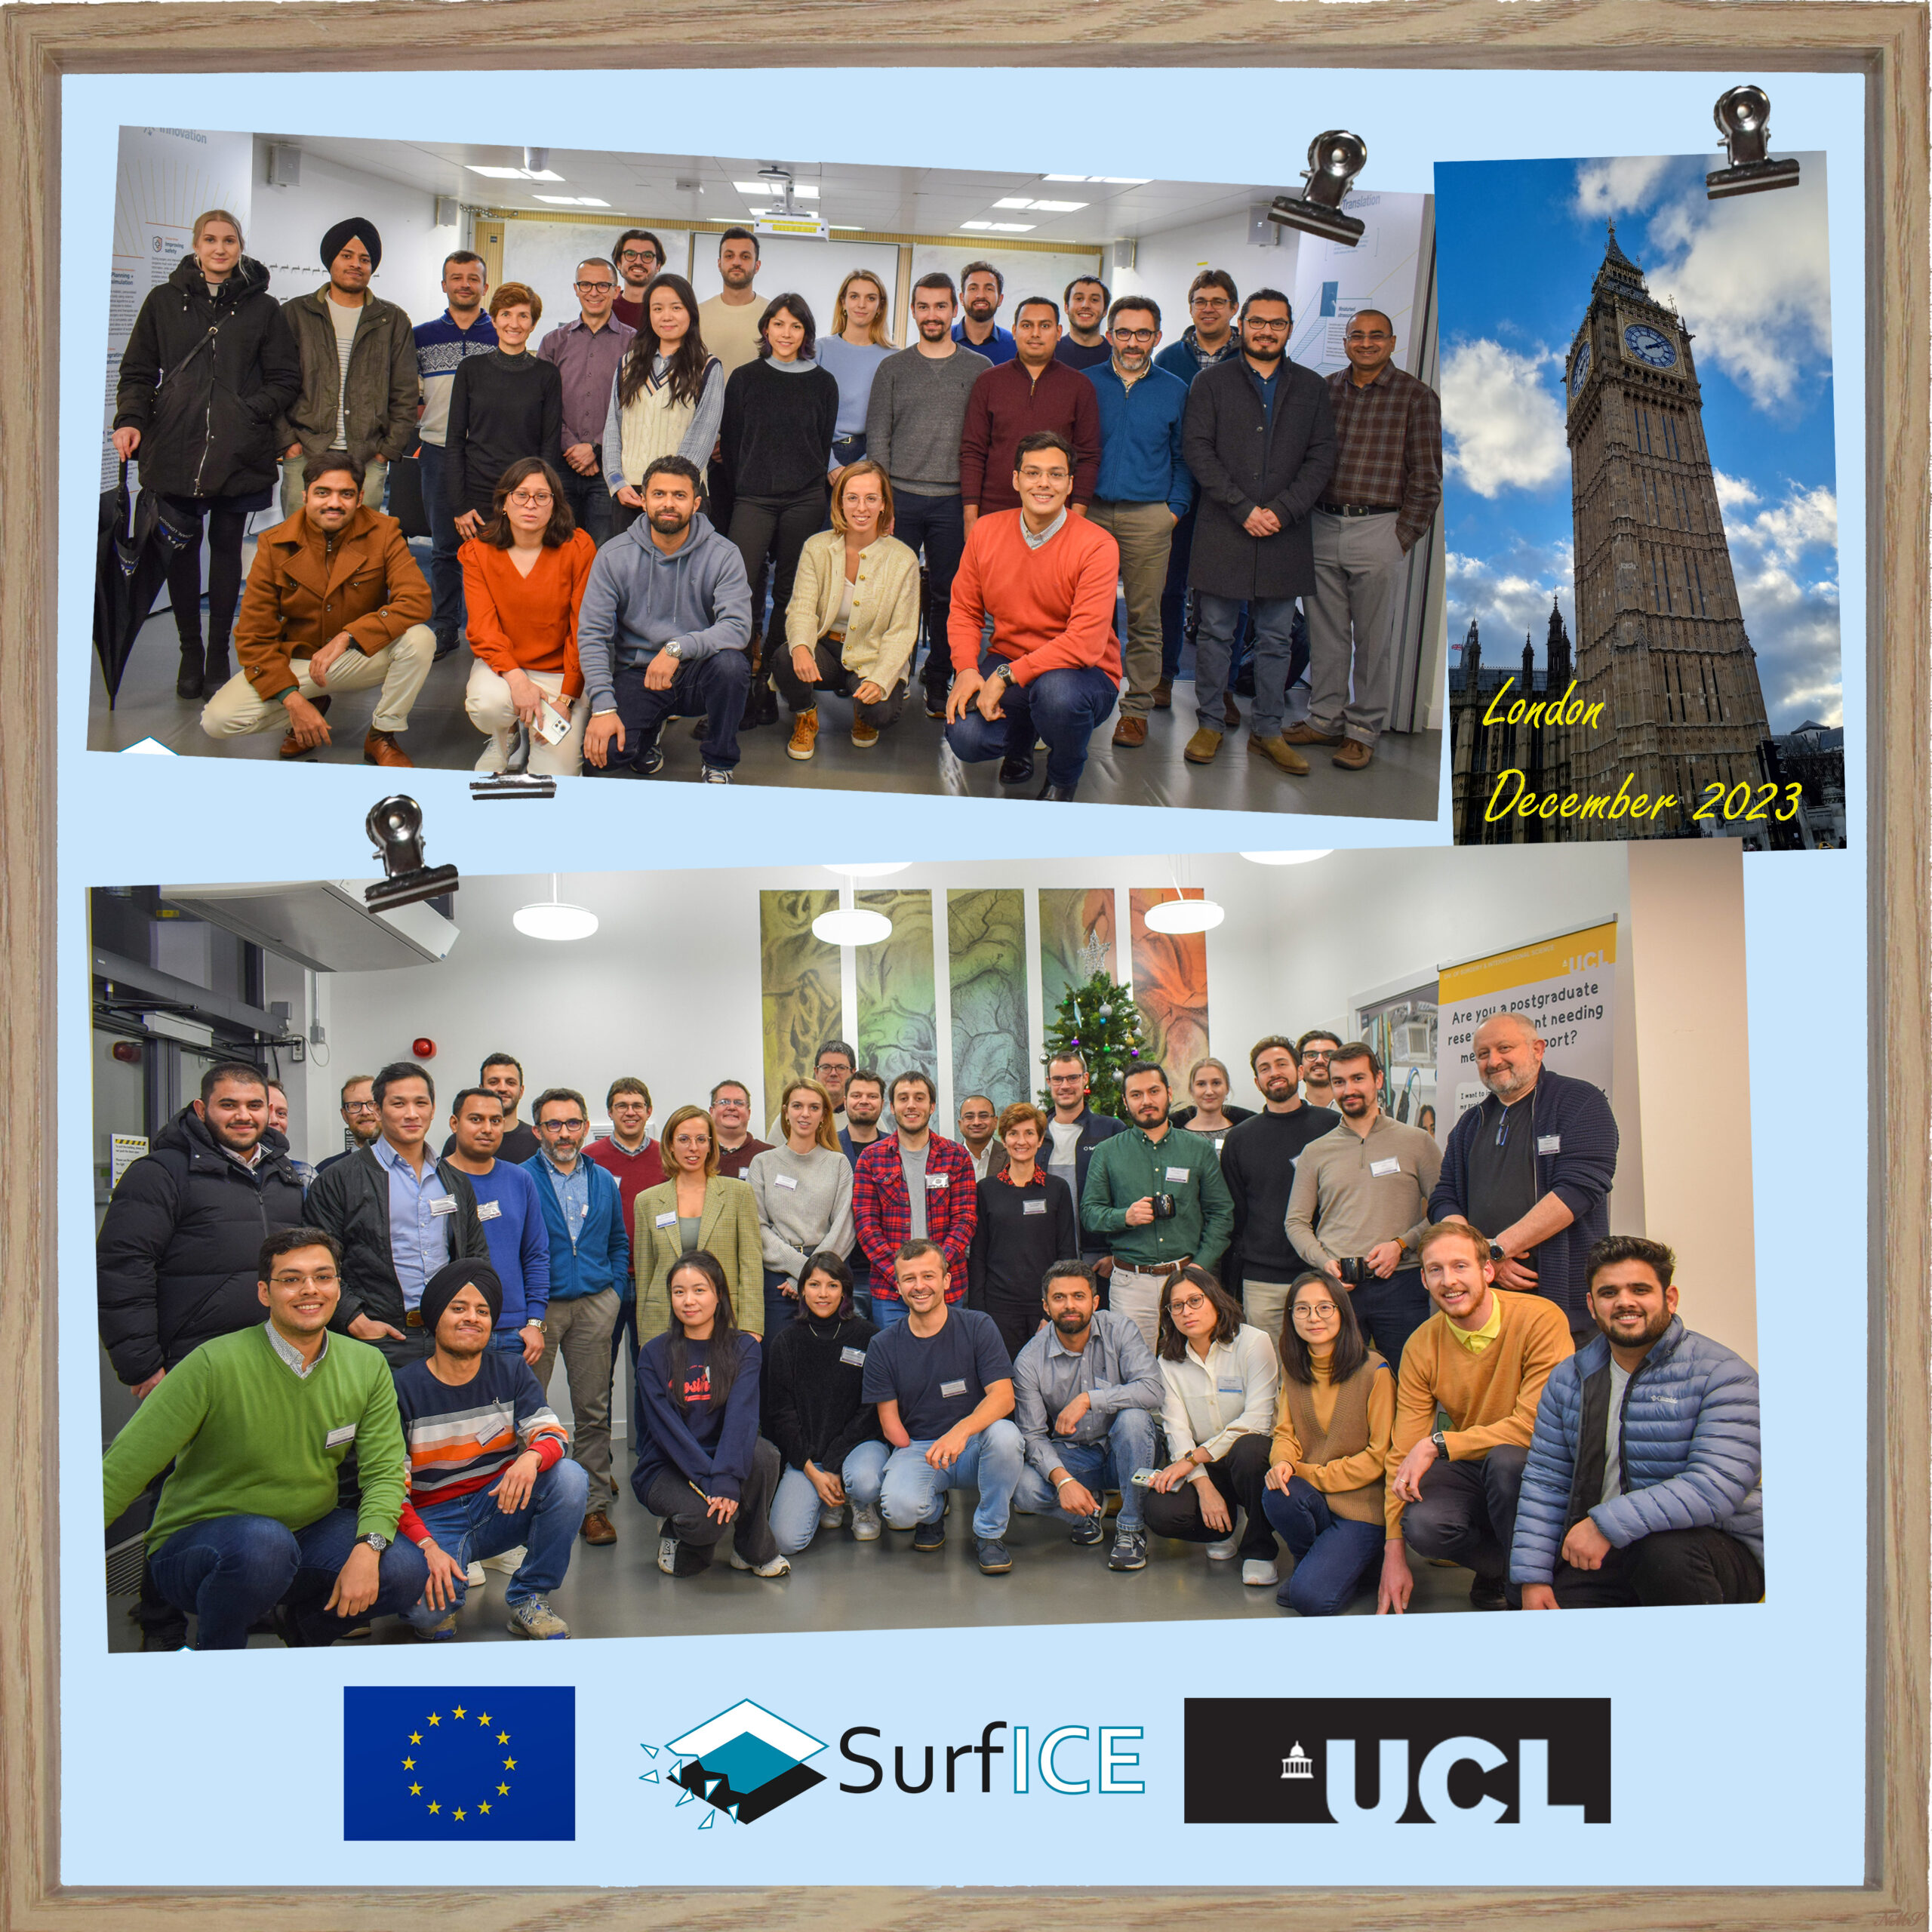 SURFICE team gathered in University College London in December 2023